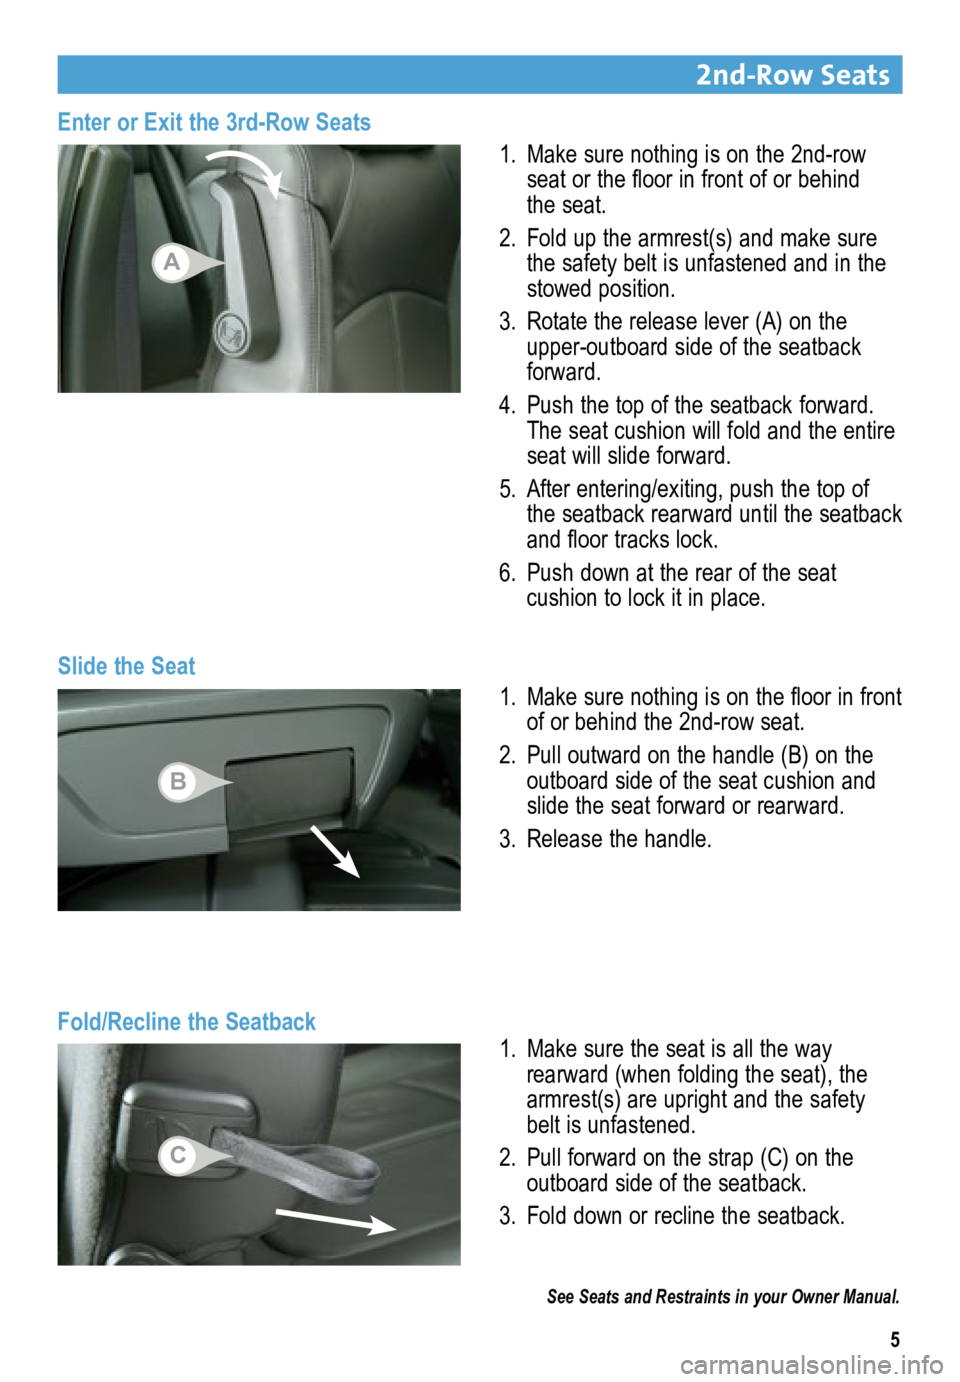 BUICK ENCLAVE 2015  Get To Know Guide 5
2nd-Row Seats 
Slide the Seat1. 
Make sure nothing is on the 2nd-row 
seat or the floor in front of or behind 
the seat.
2.  Fold up the armrest(s) and make sure 
the safety belt is unfastened and i